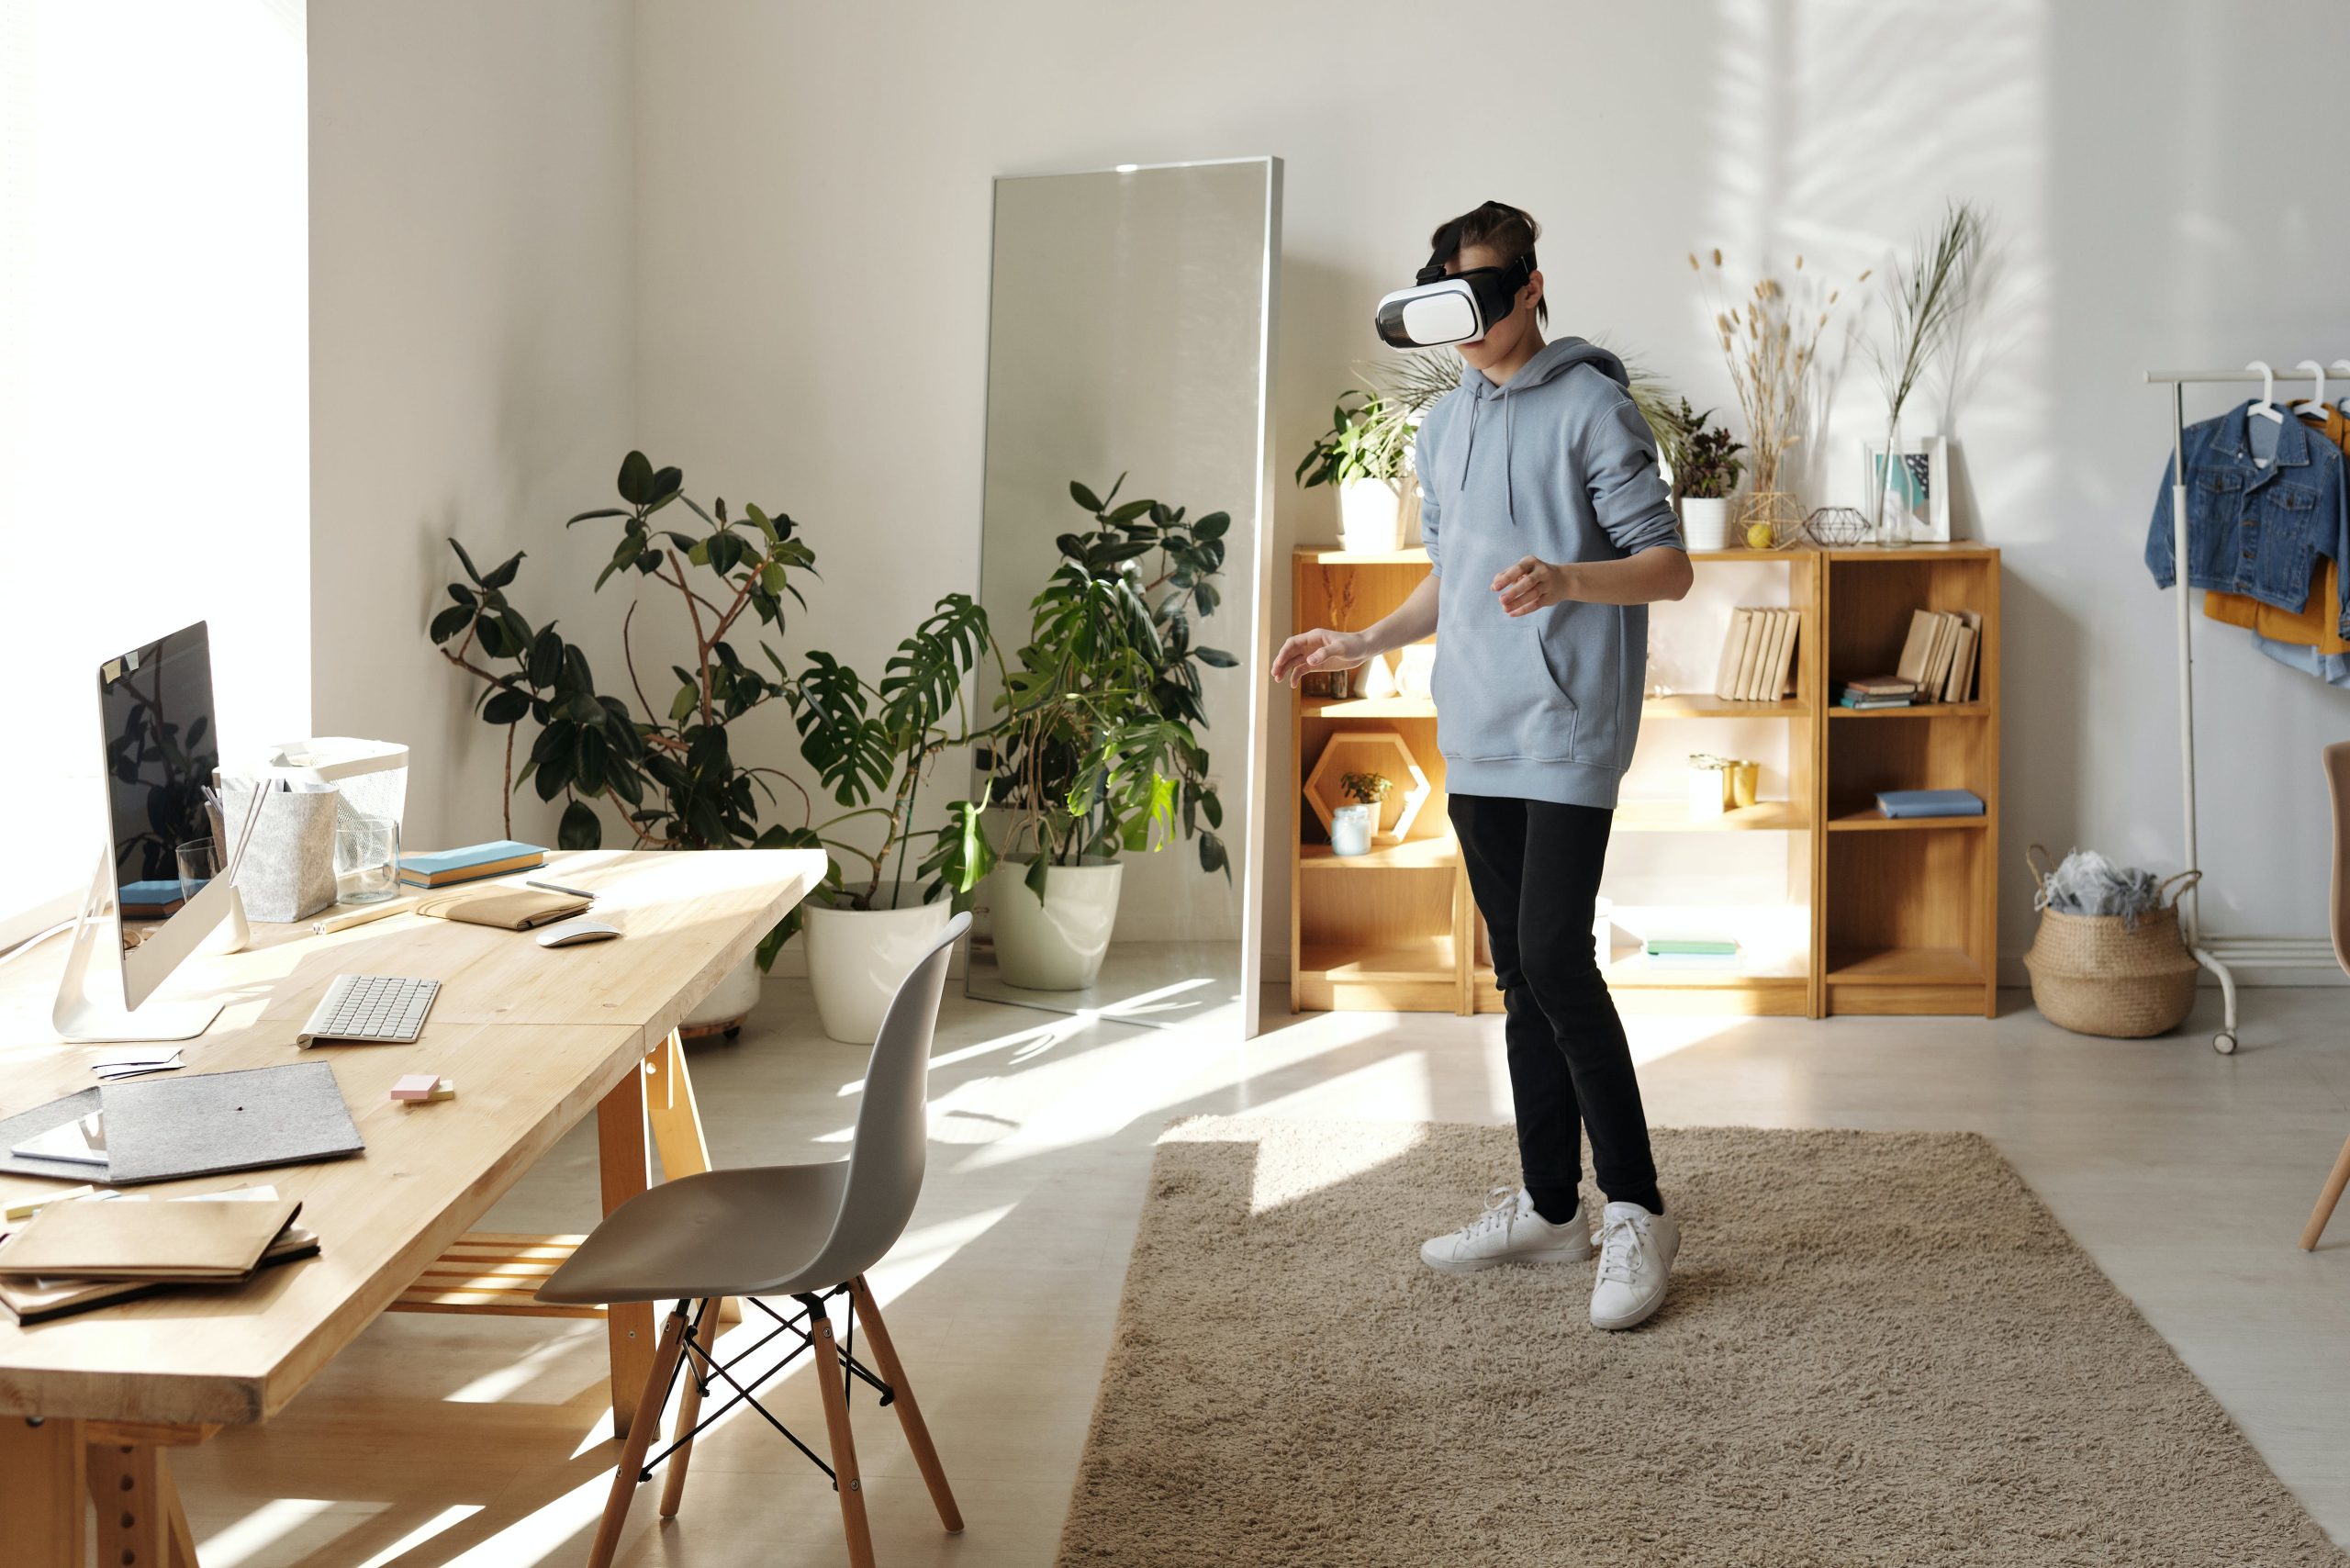 A picture of someone using a VR headset in a home office